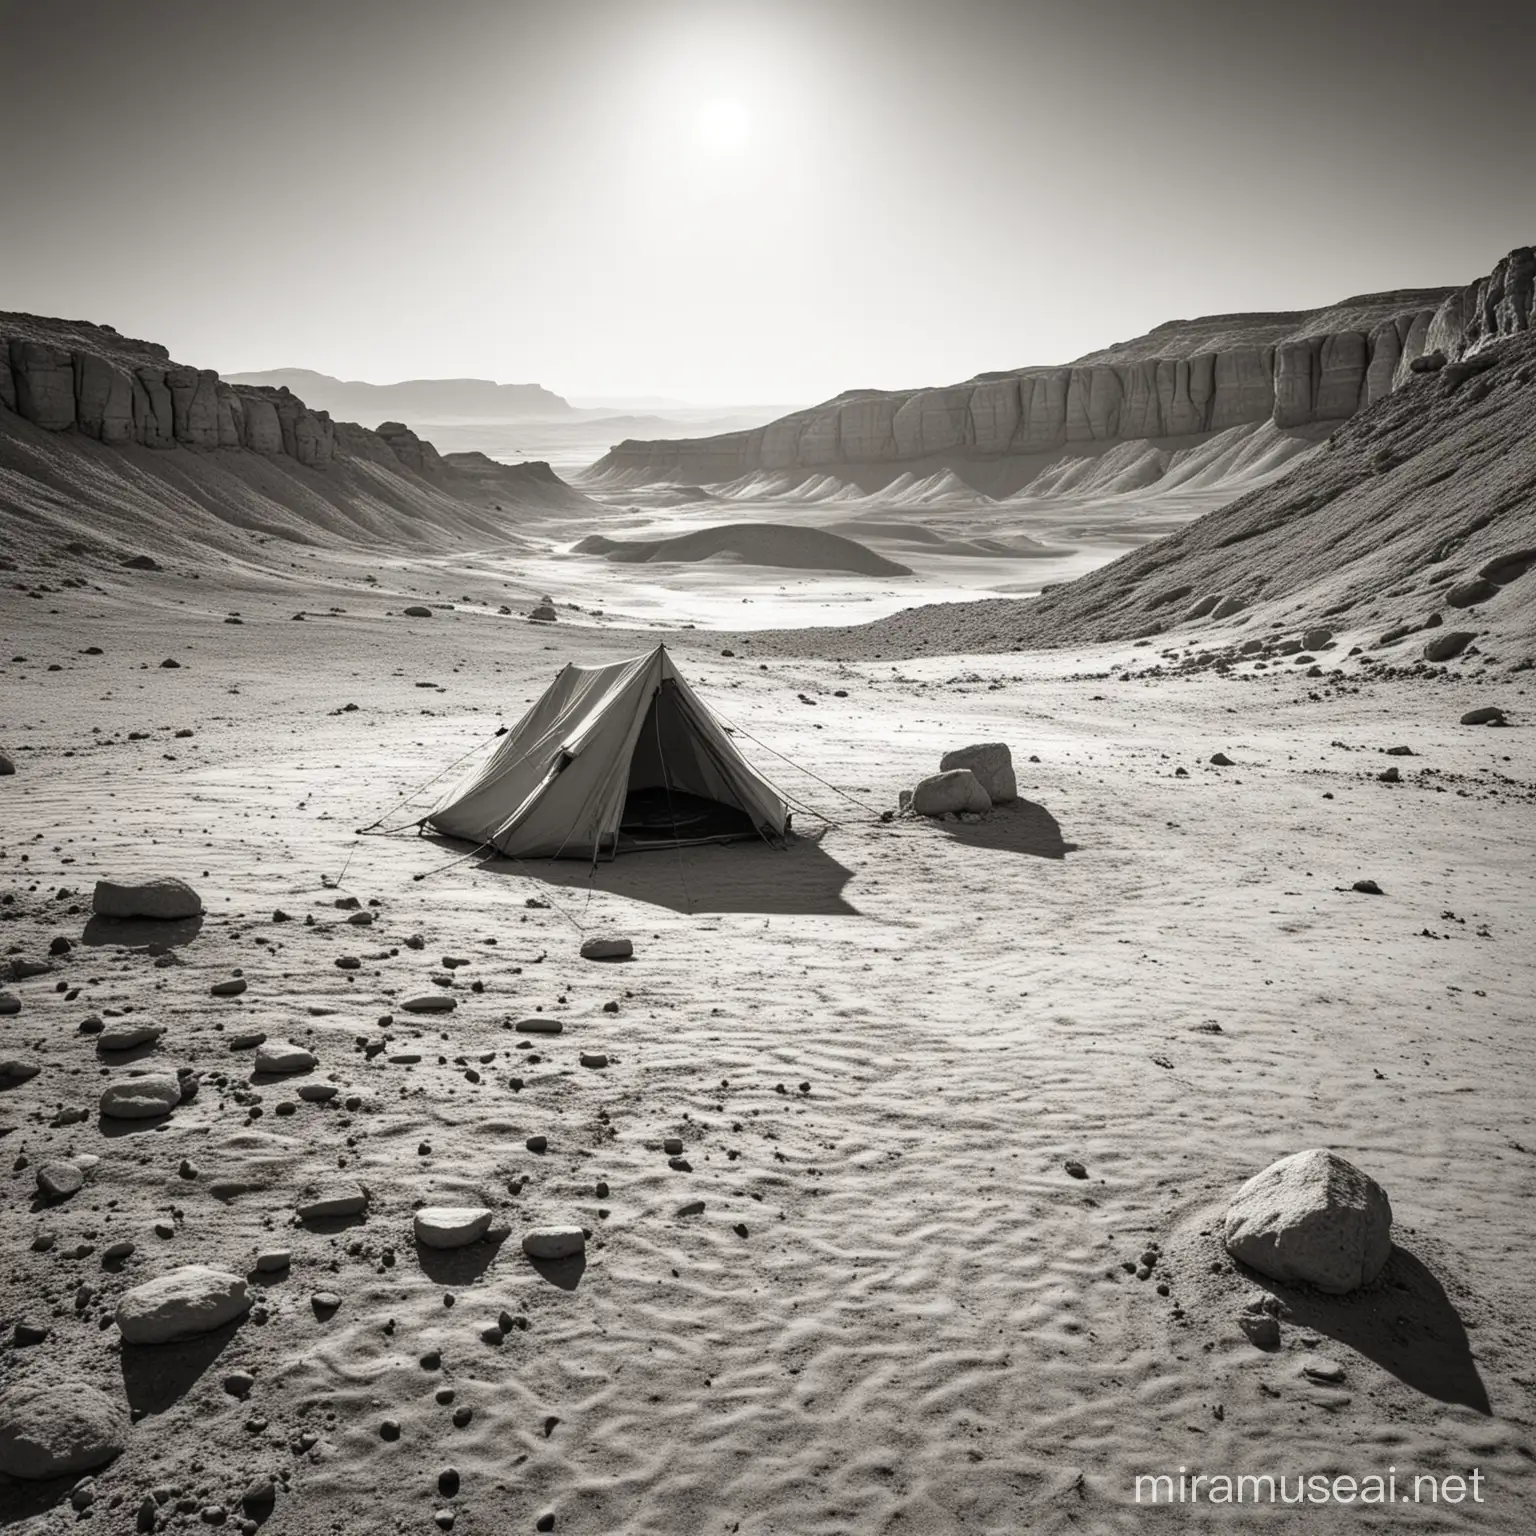 a simple dlack and white pencil drawing of an isolated camping tent in the Ramon crater in the Negev desert in Israel. no plants at all, only sand and rocks. there is a small scorpion near the enterance of the tent. hyper reality. horror style